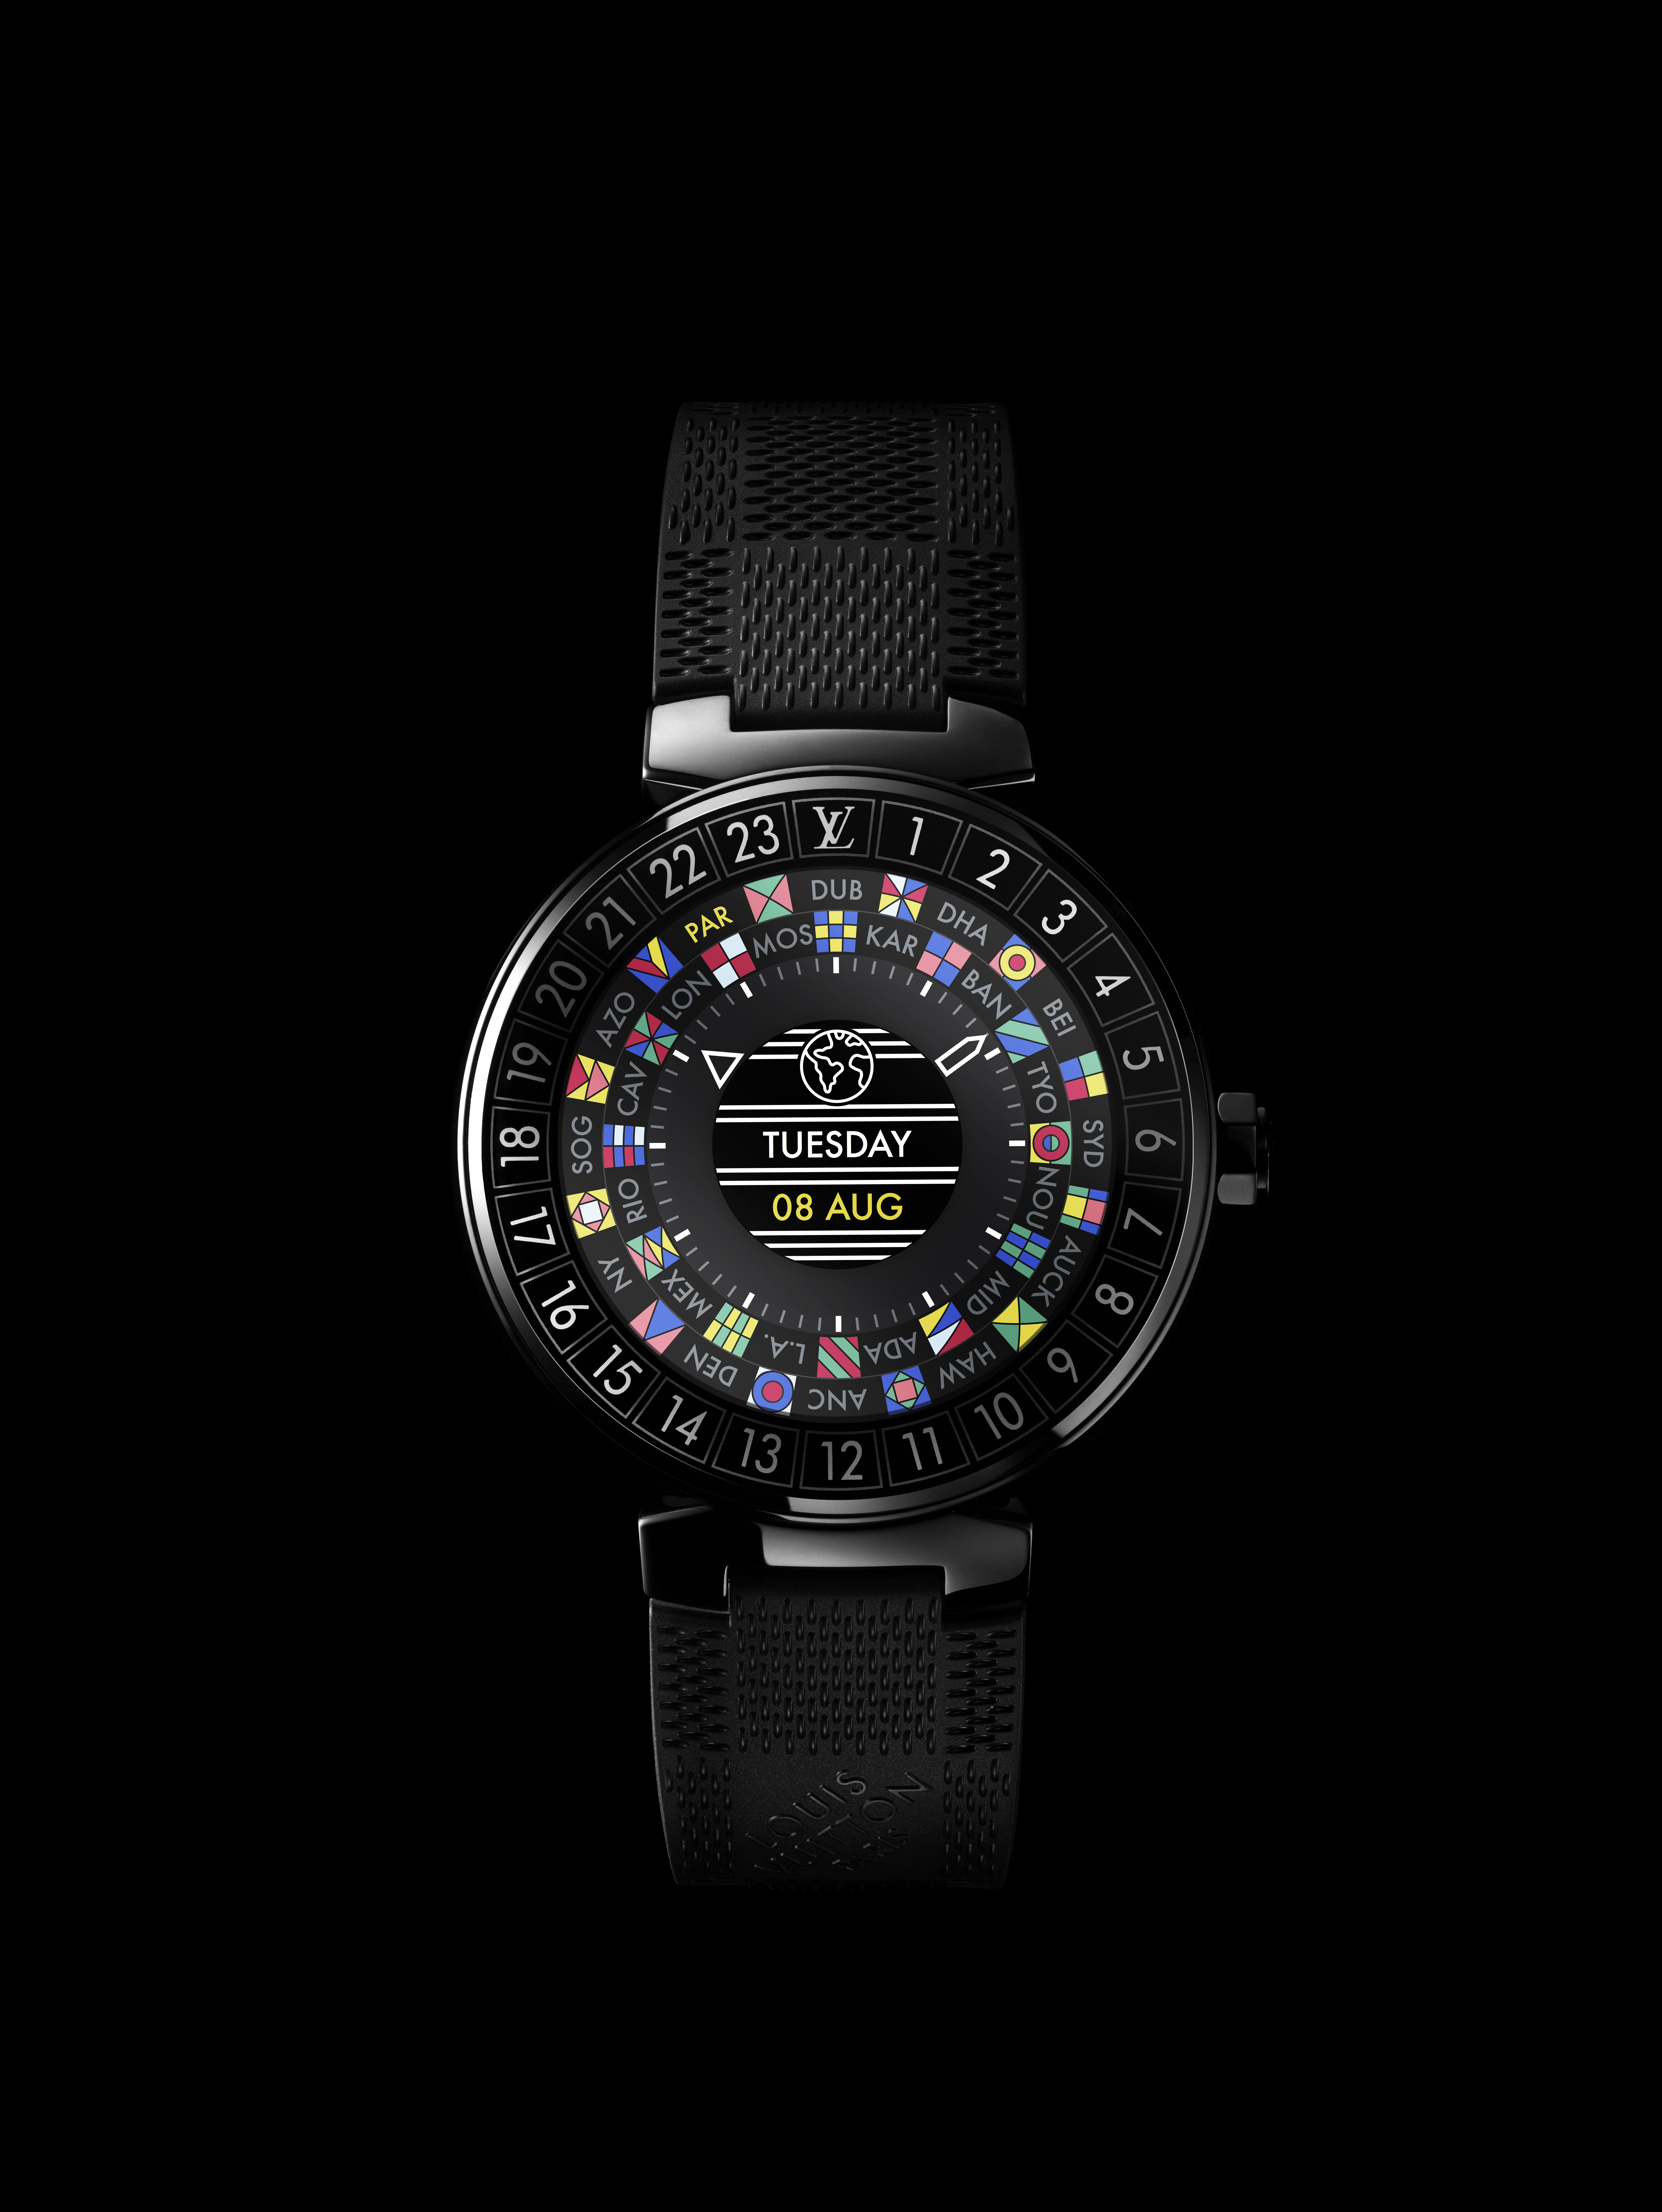 Louis Vuitton Tambour Moon Dual Time is a watch for globetrotters